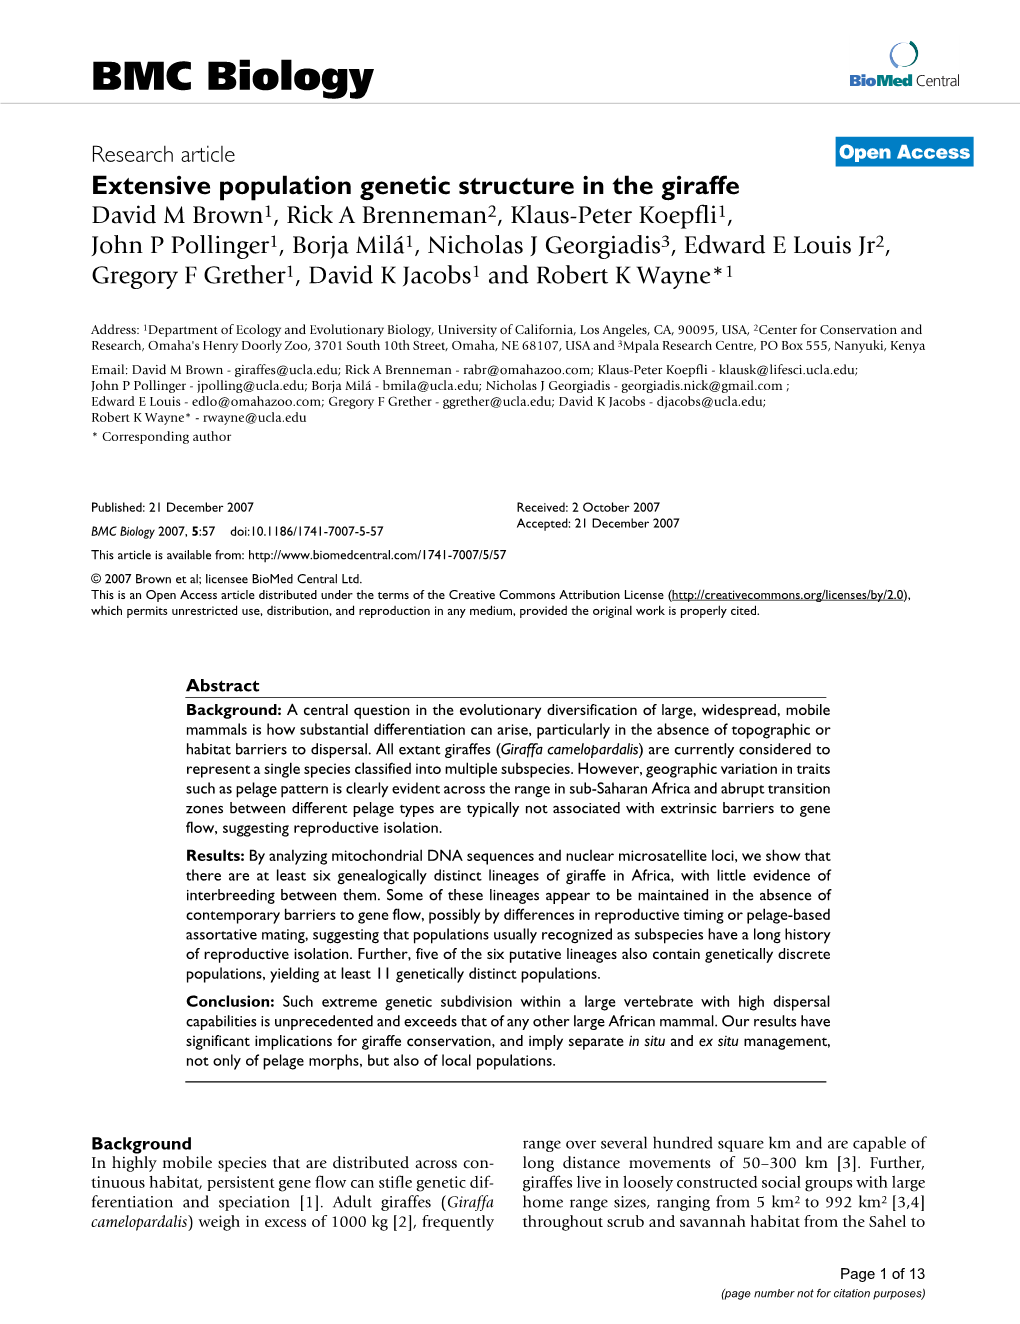 Extensive Population Genetic Structure in the Giraffe